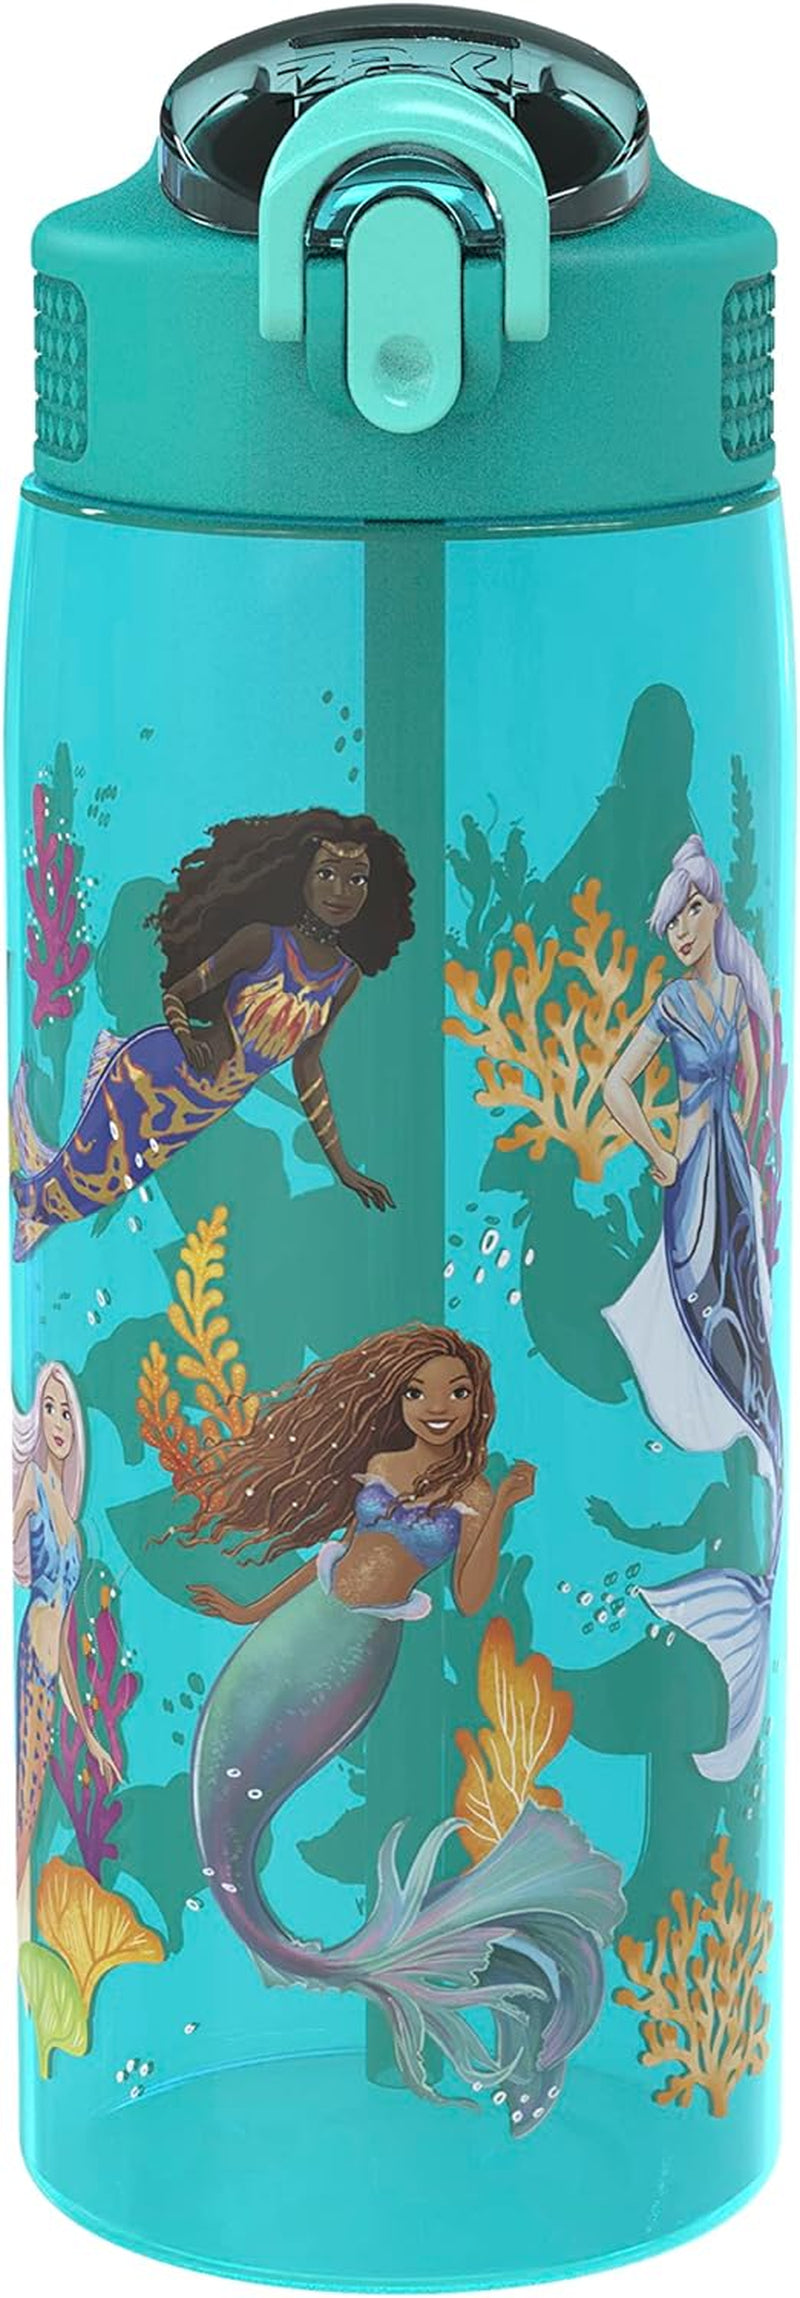 Sage Bluey Kids Water Bottle for School or Travel, 16Oz Durable Plastic Water Bottle with Straw, Handle, and Leak-Proof, Pop-Up Spout Cover (Bluey & Bingo)